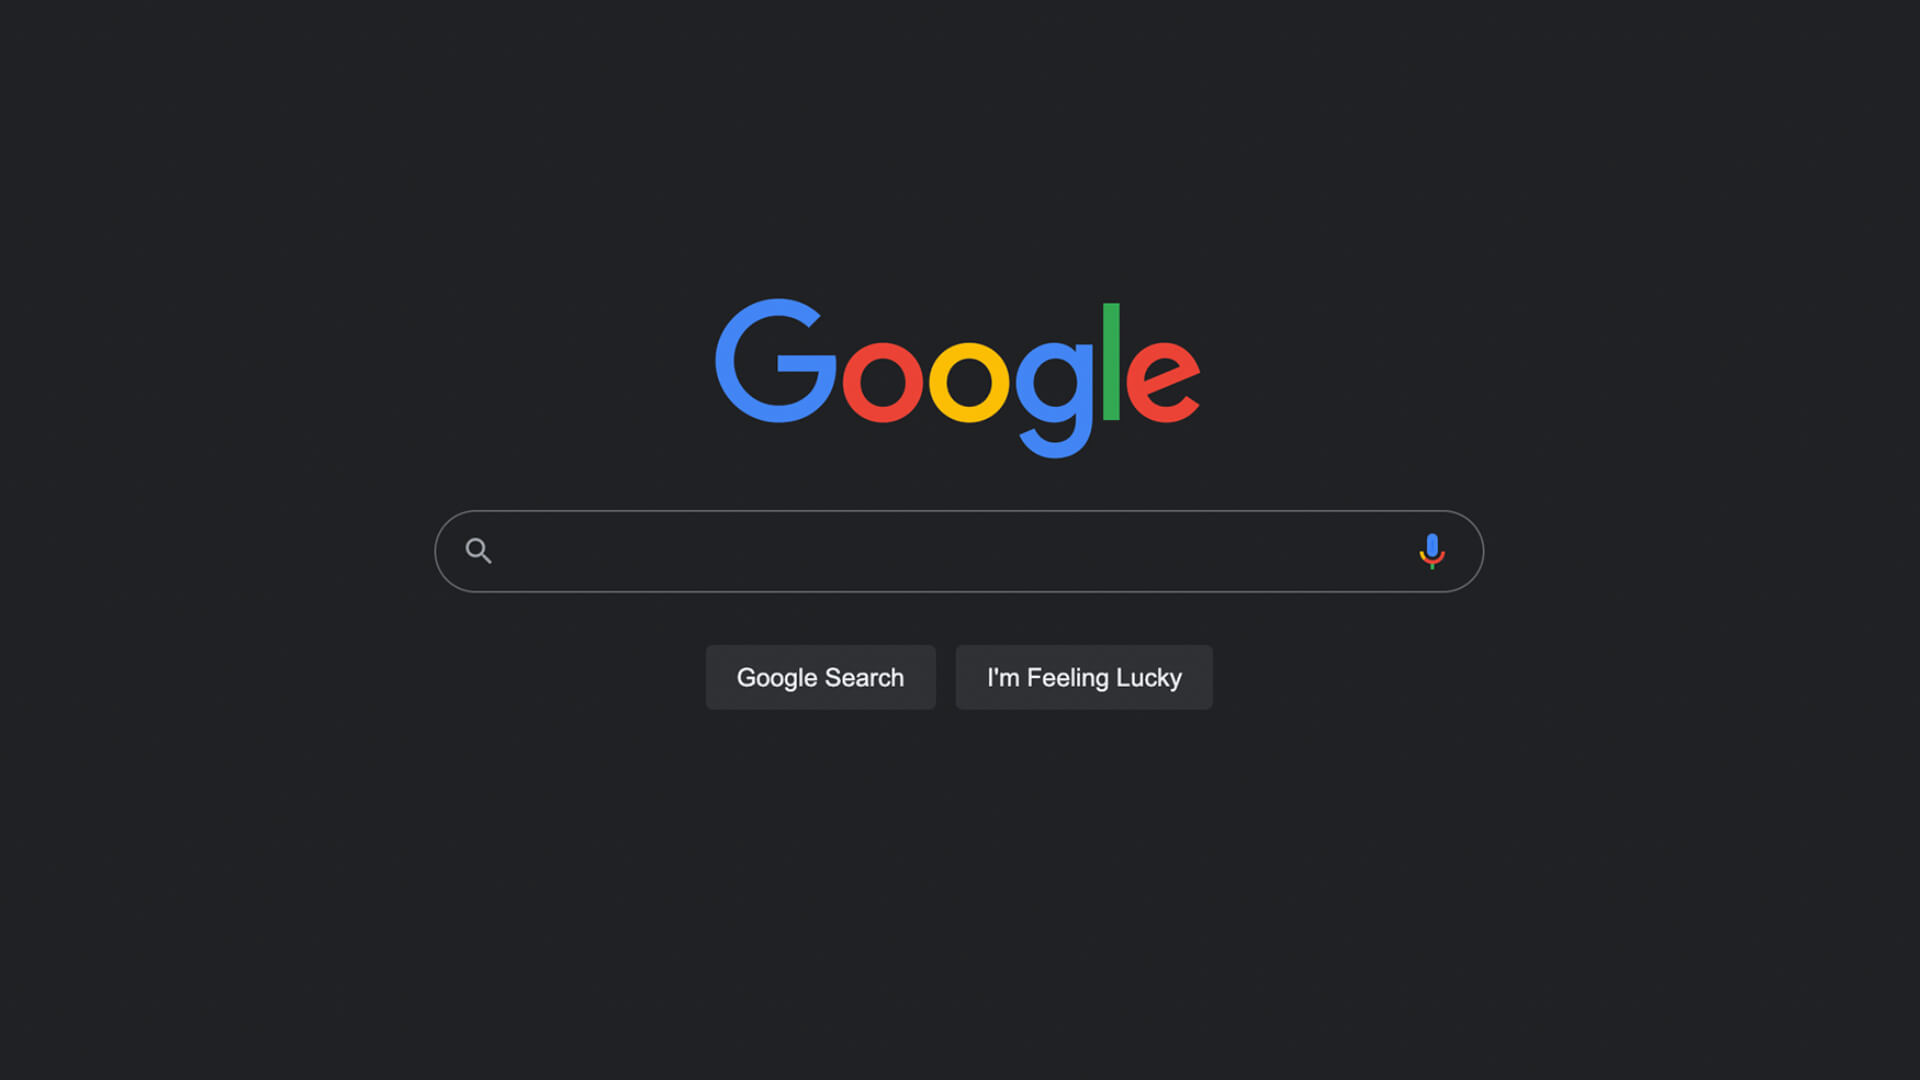 google-goes-dark-theme-and-passage-ranking-sees-the-light-fridays-daily-brief